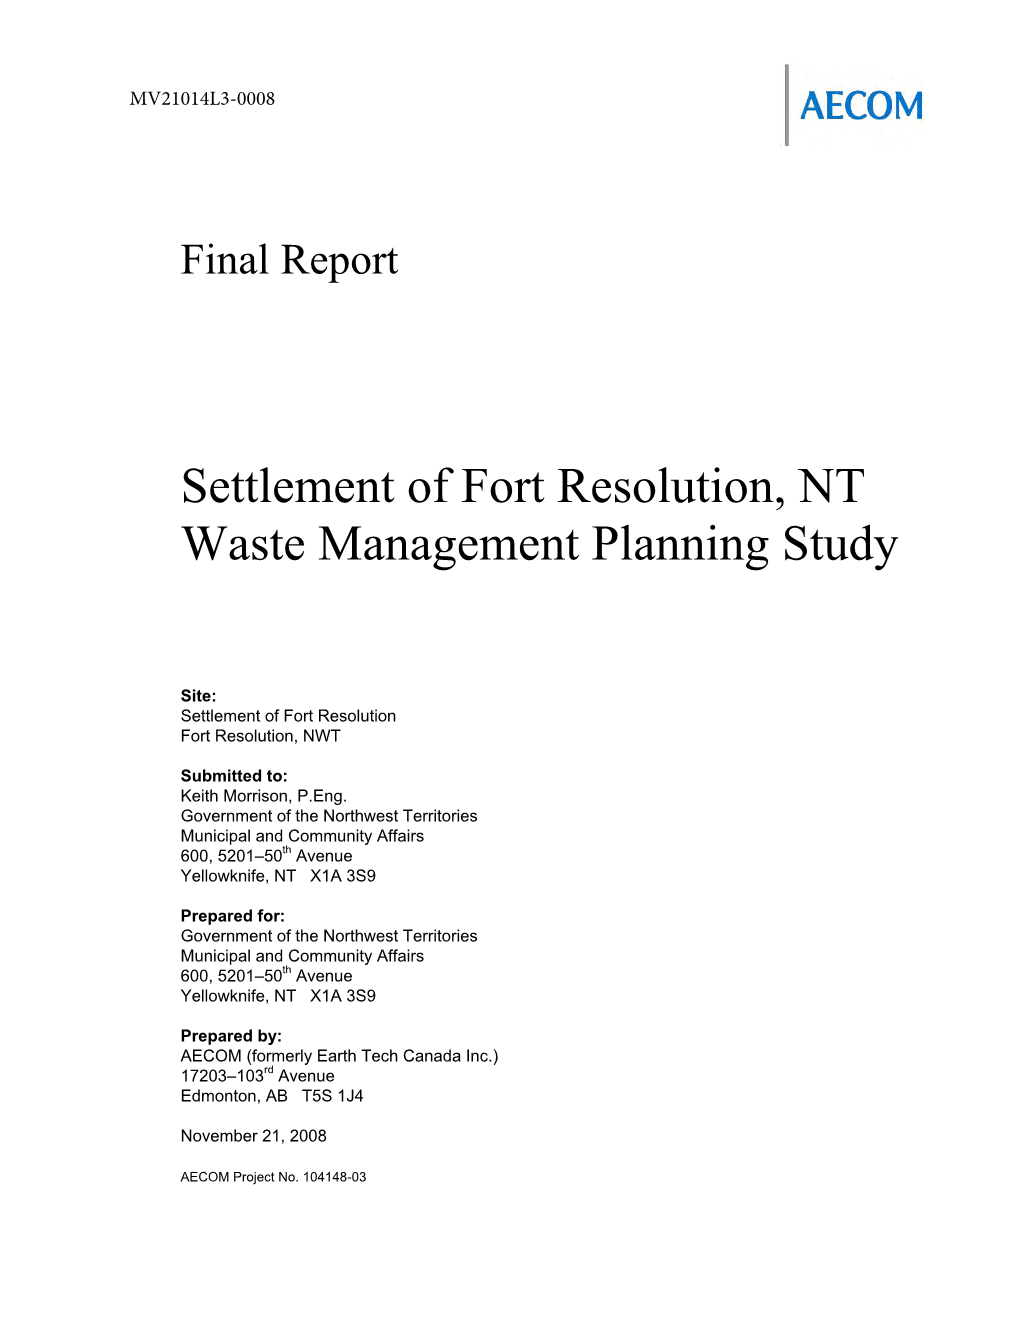 Settlement of Fort Resolution, NT Waste Management Planning Study